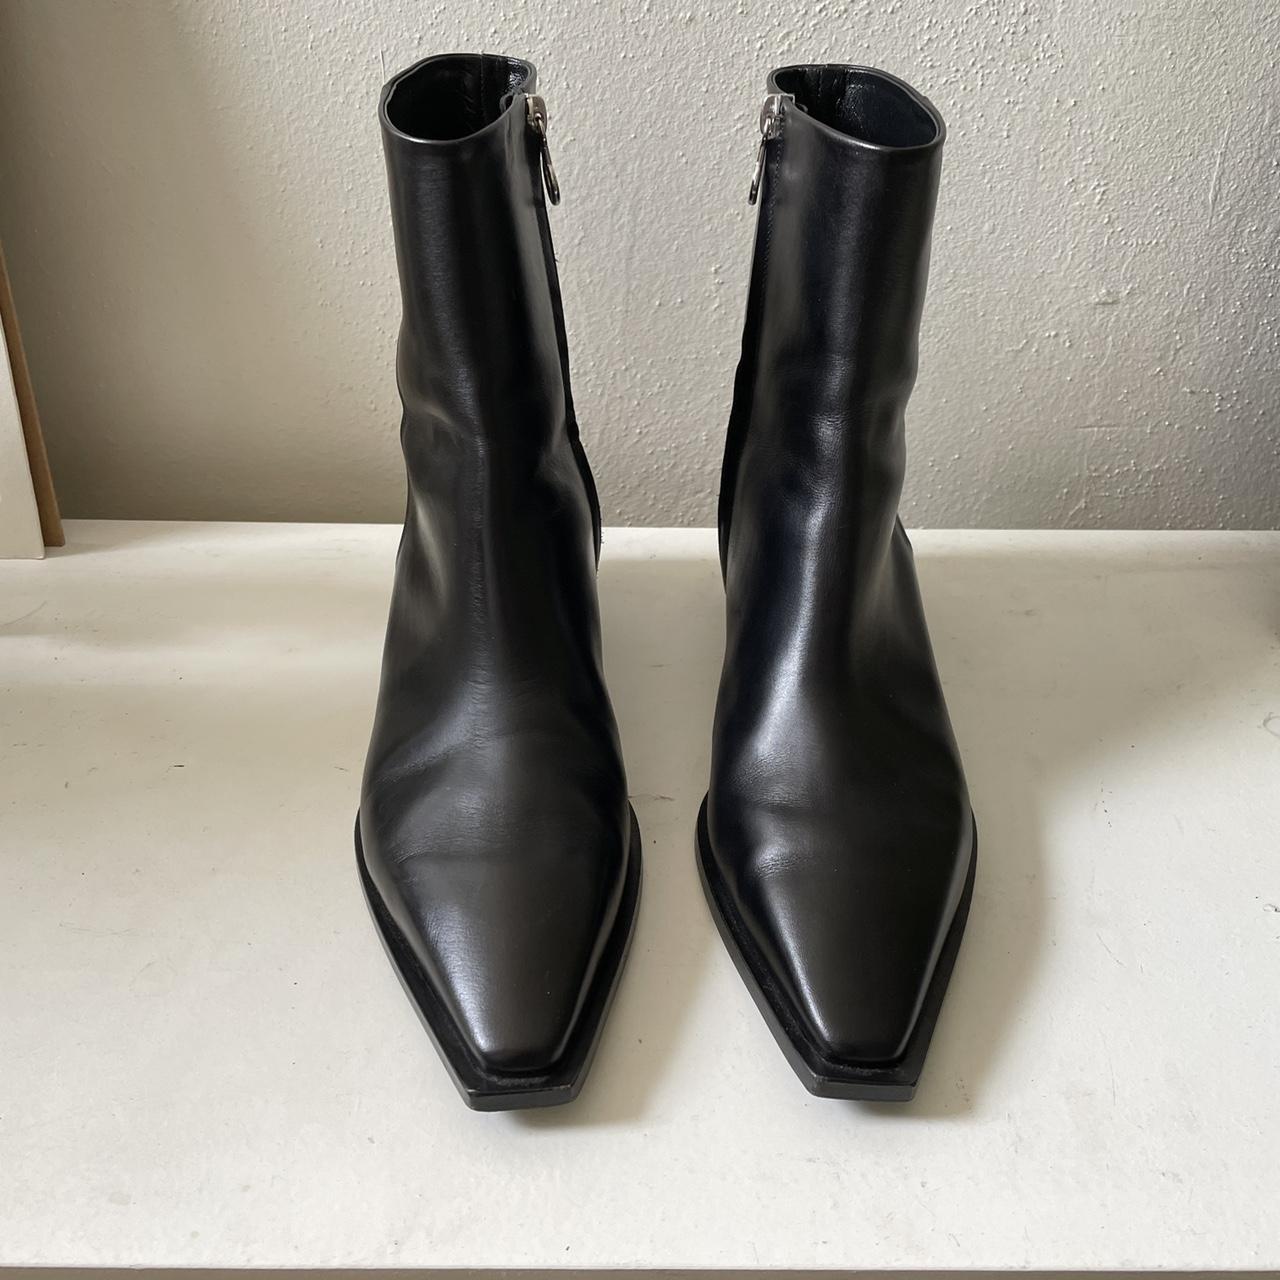 Aeyde Ruby boots. In new condition worn once for a... - Depop